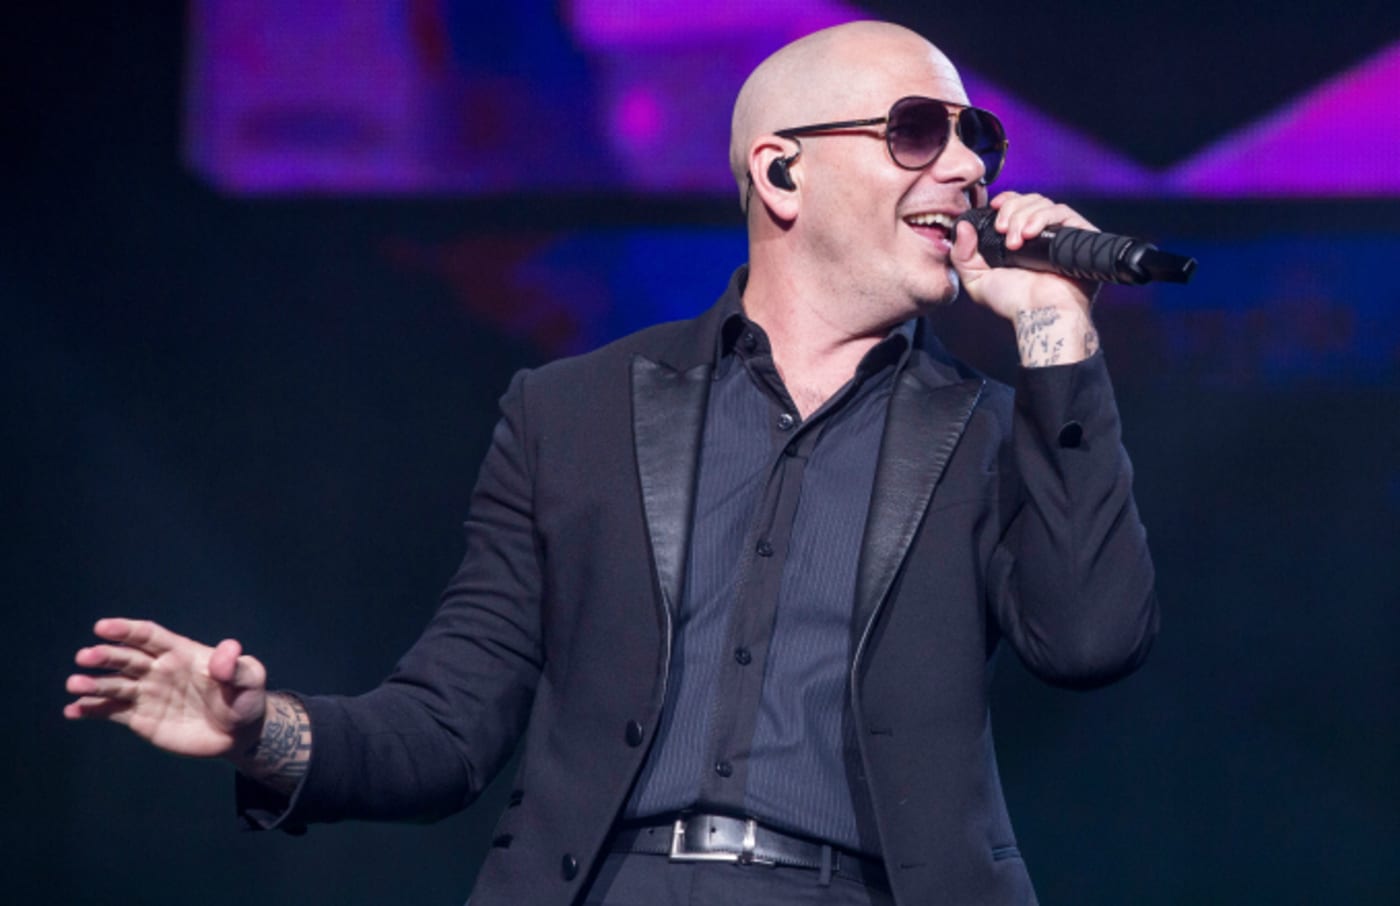 Pitbull performs during The Bad Man Tour 2016 at DTE Energy Music Theater